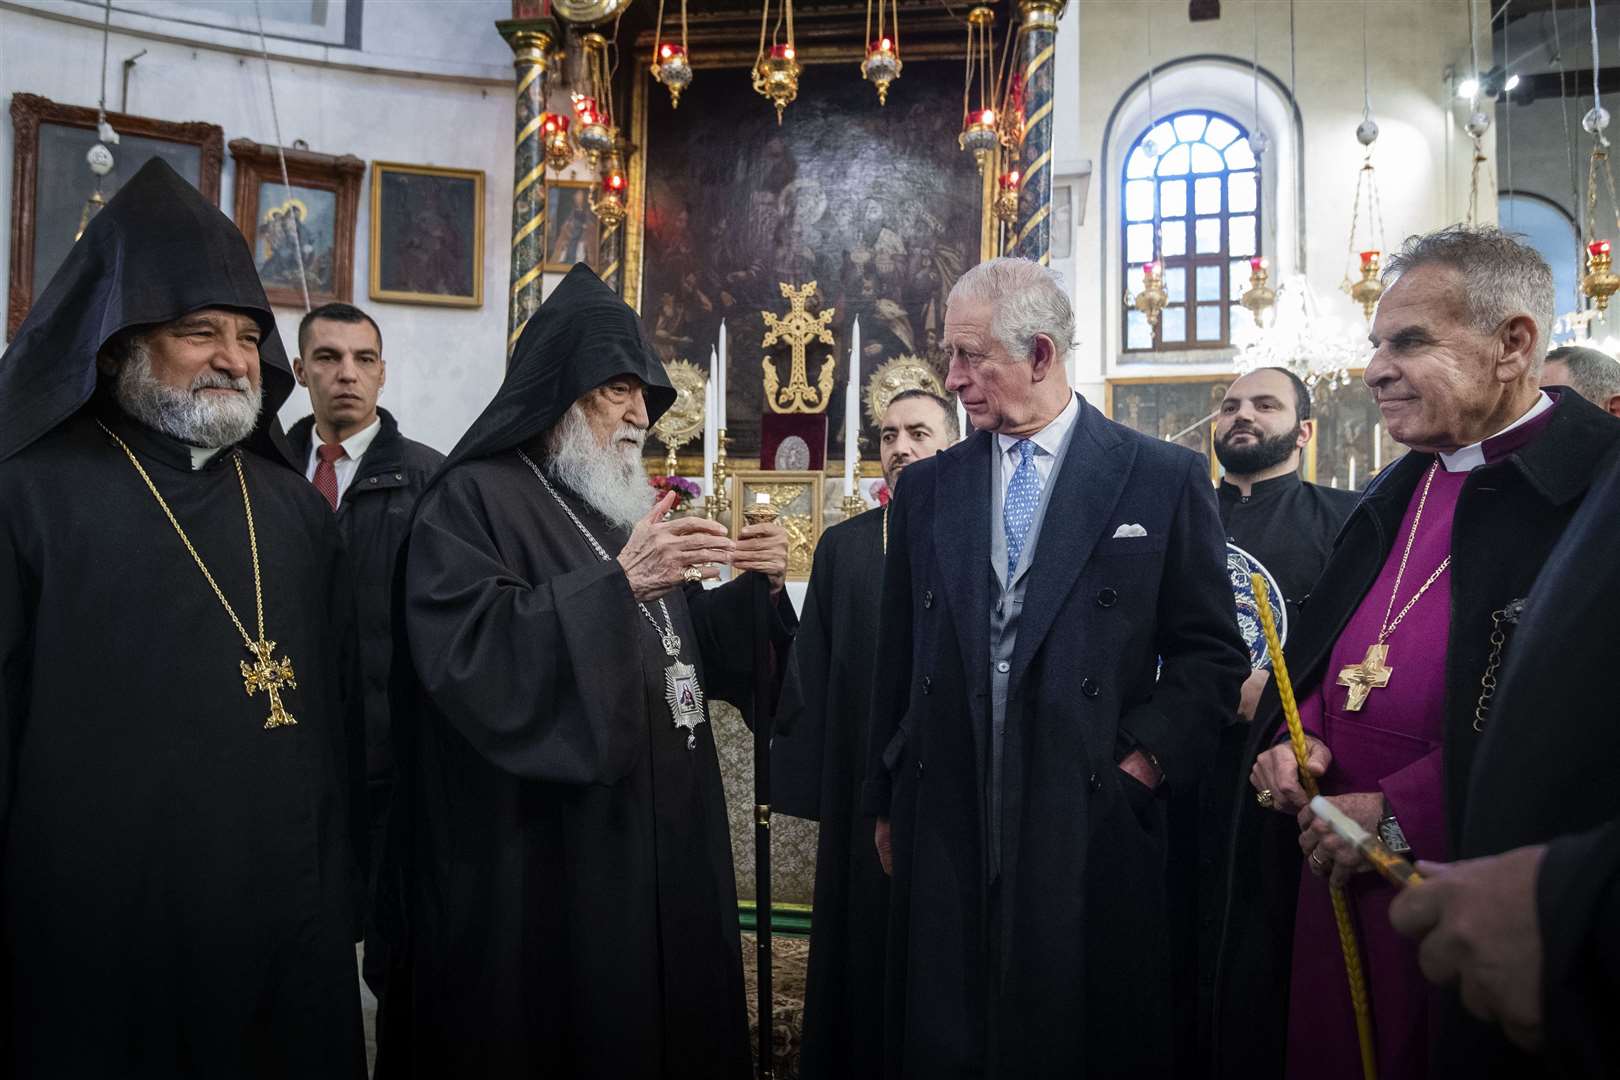 Charles during a visit to the Church of the Nativity in Bethlehem (Victoria Jones/PA)